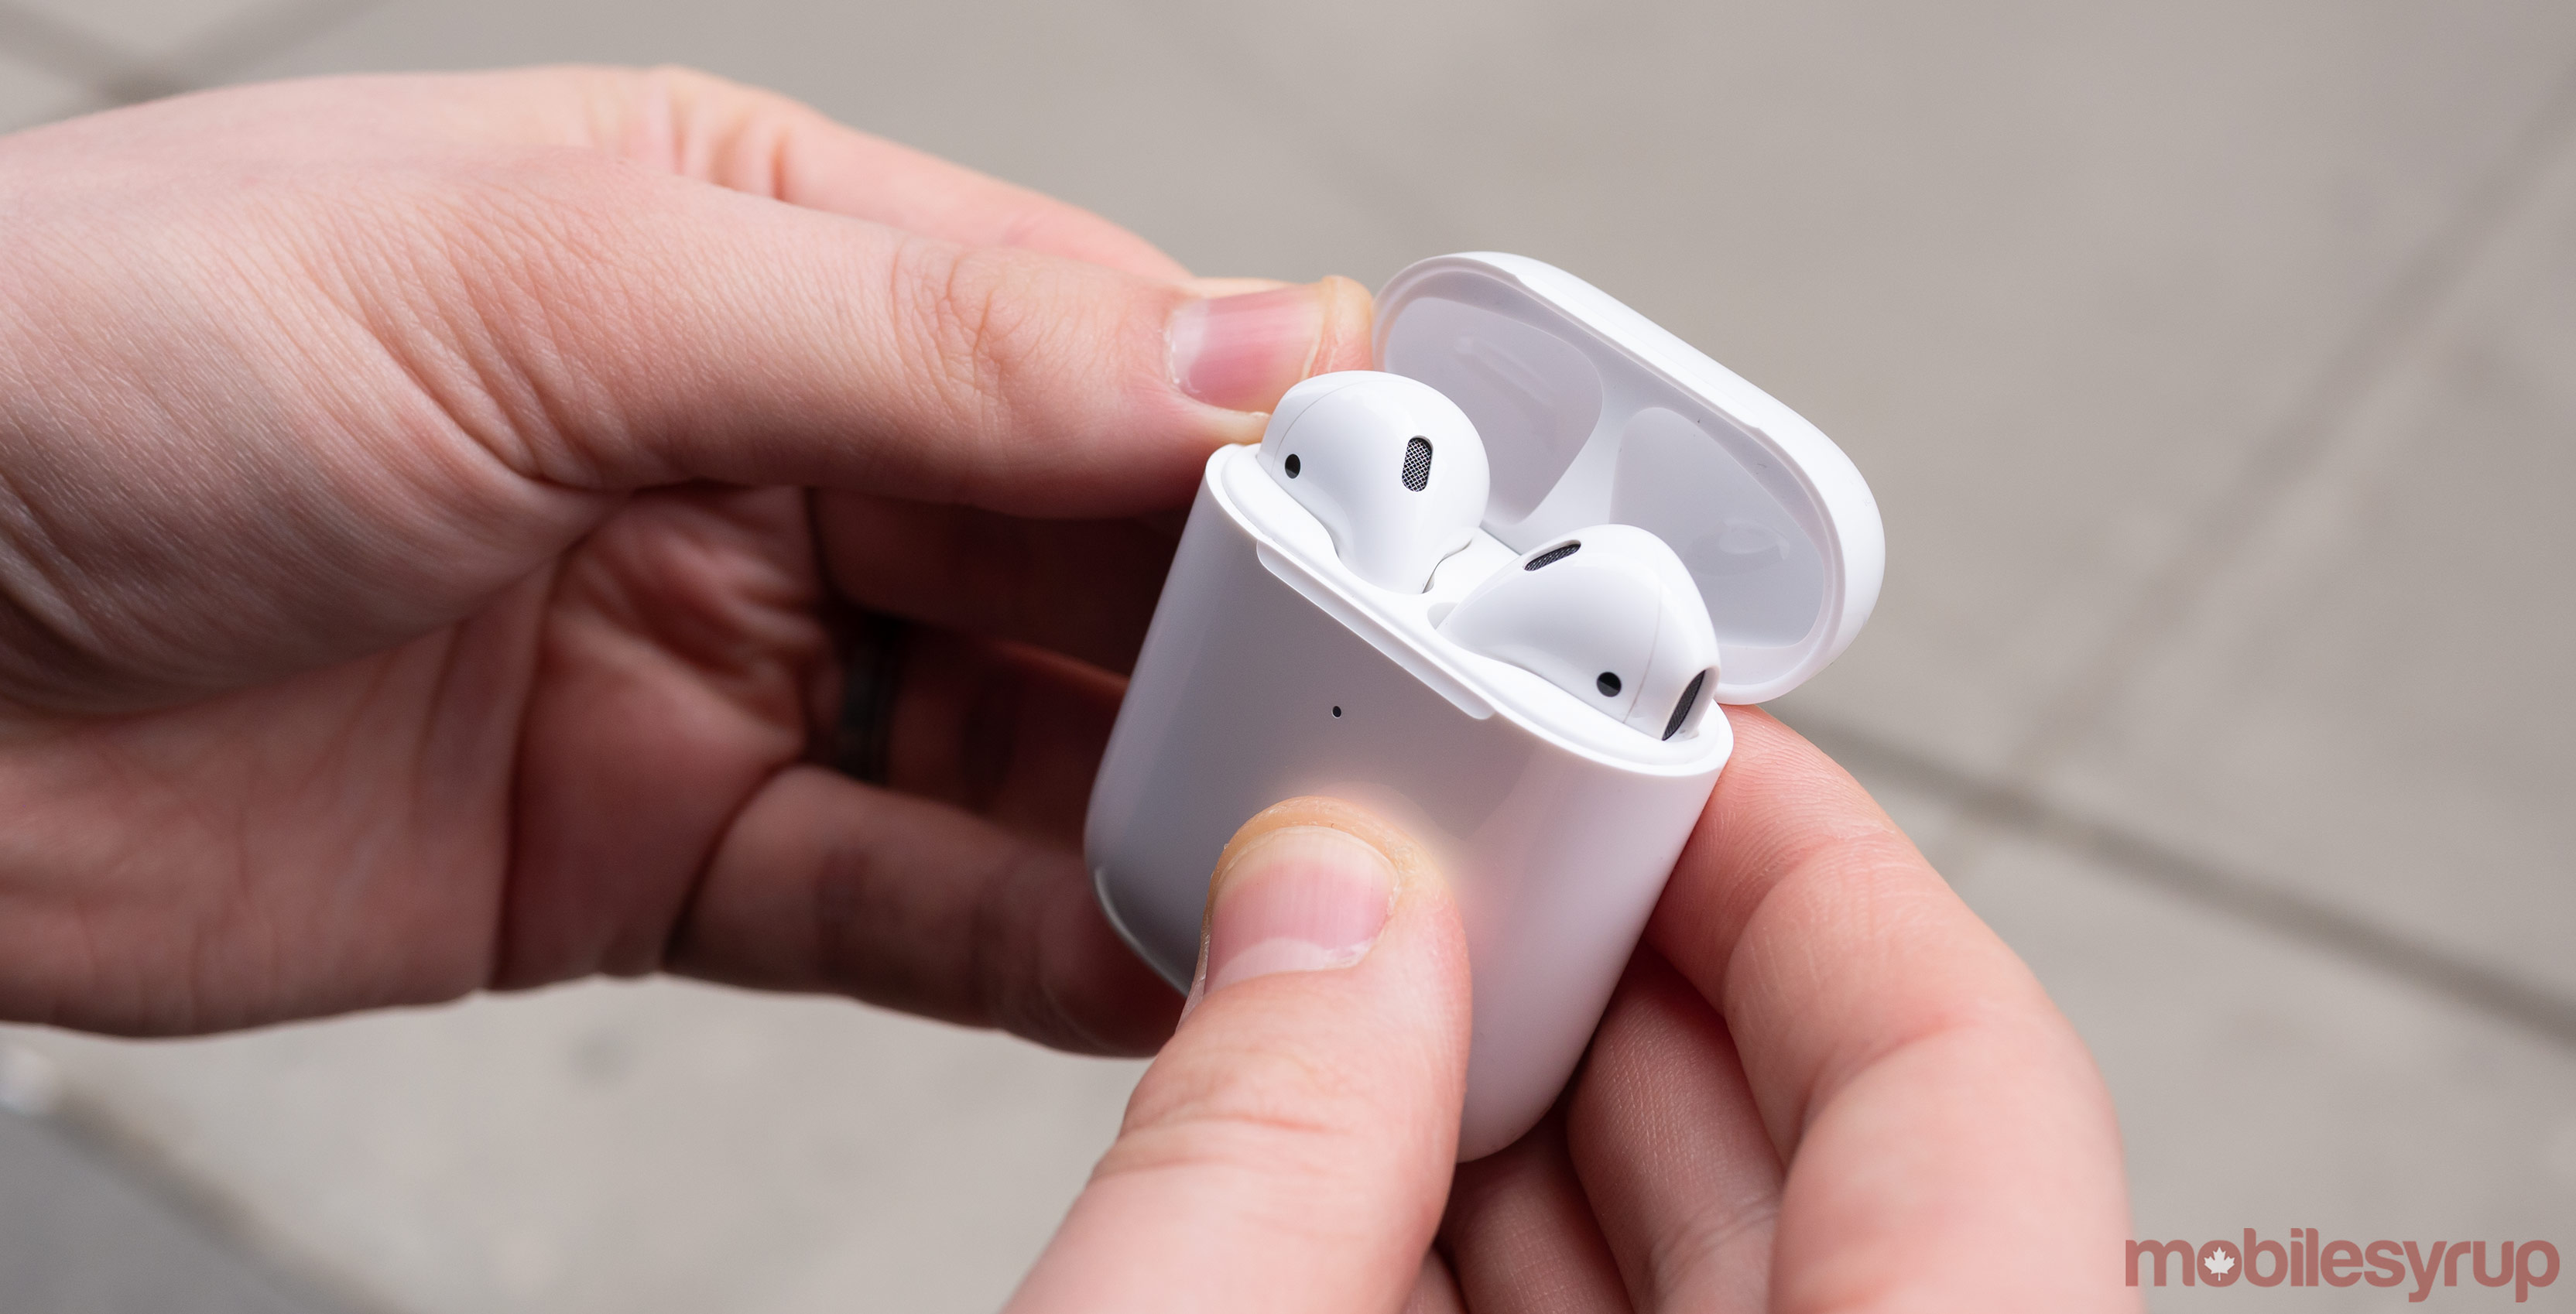 2nd-generation AirPods